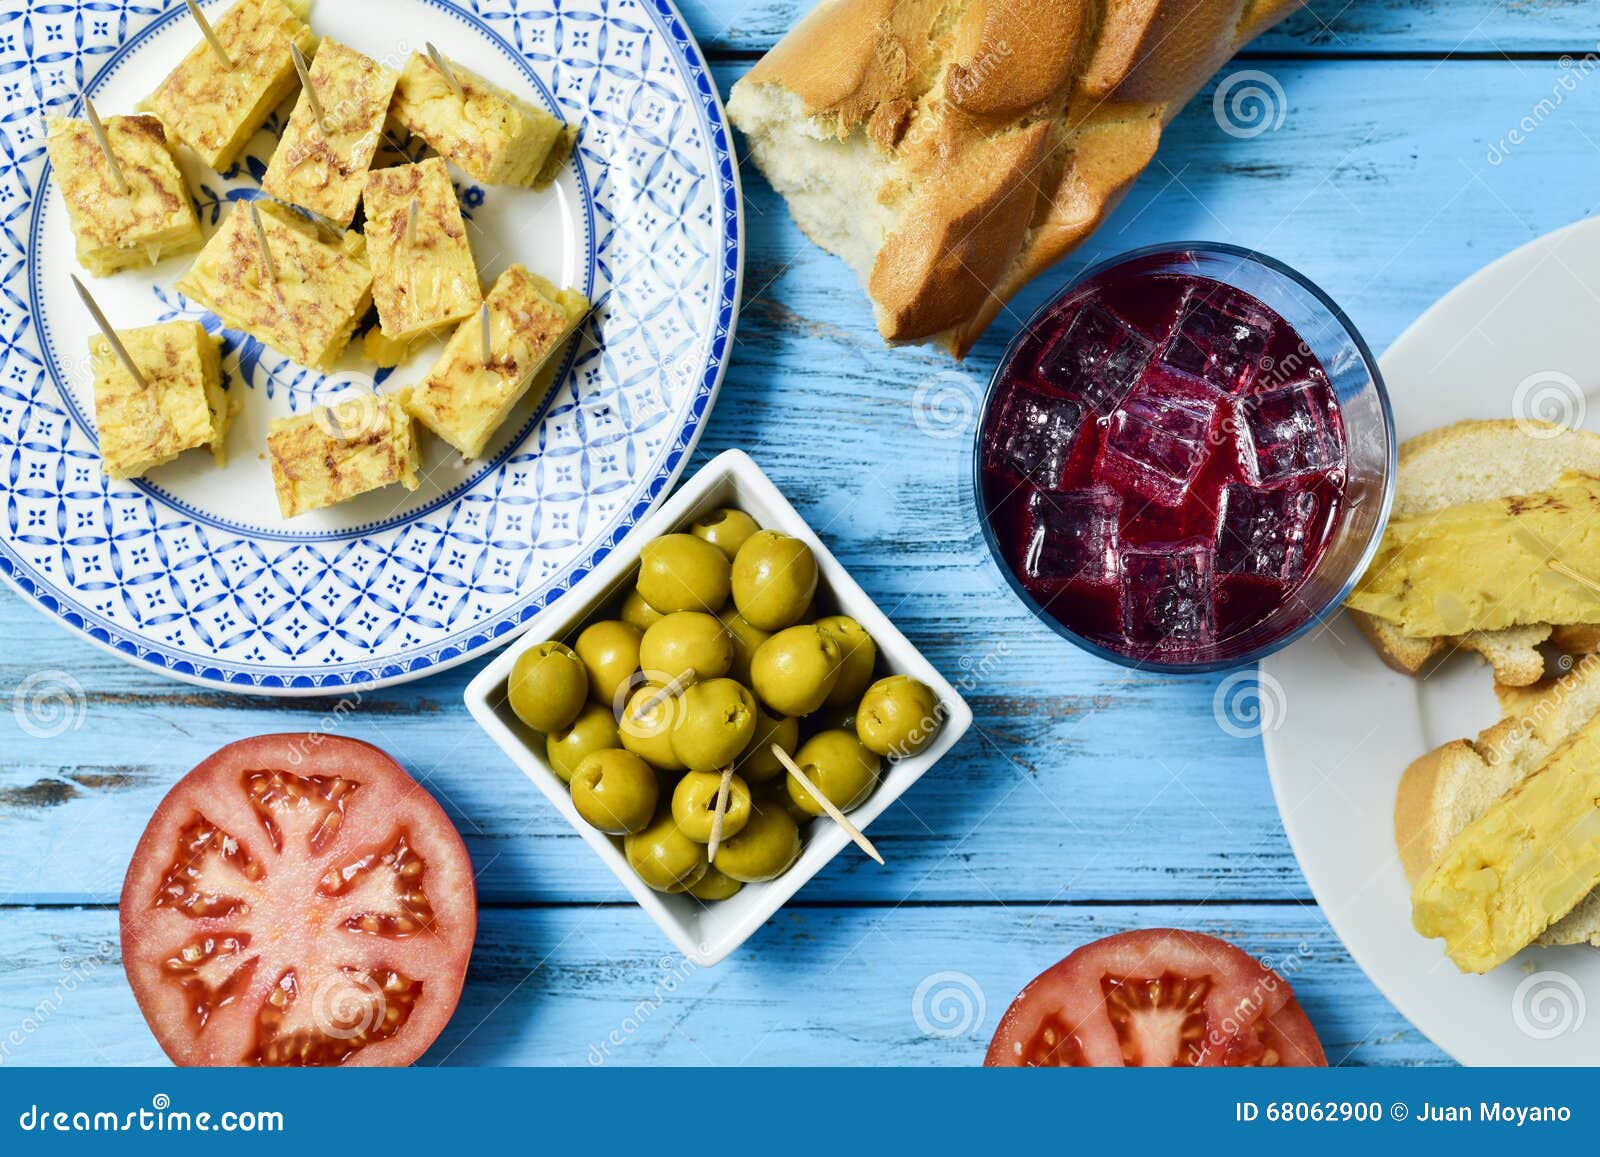 tinto de verano, olives, and spanish omelet